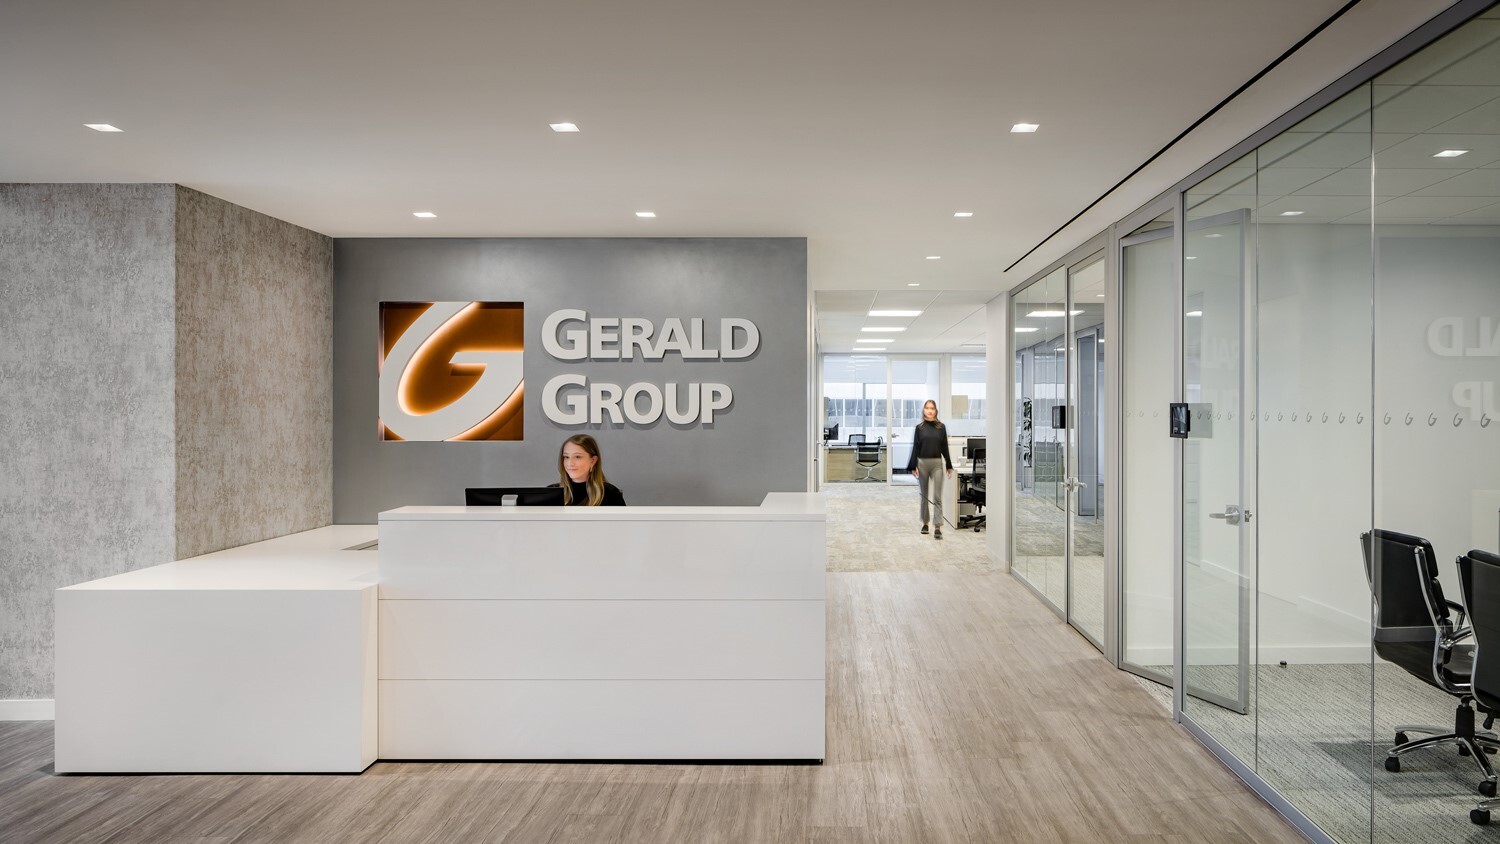 Gerald Group's North American hub achieves green loan accreditation for low-carbon aluminium